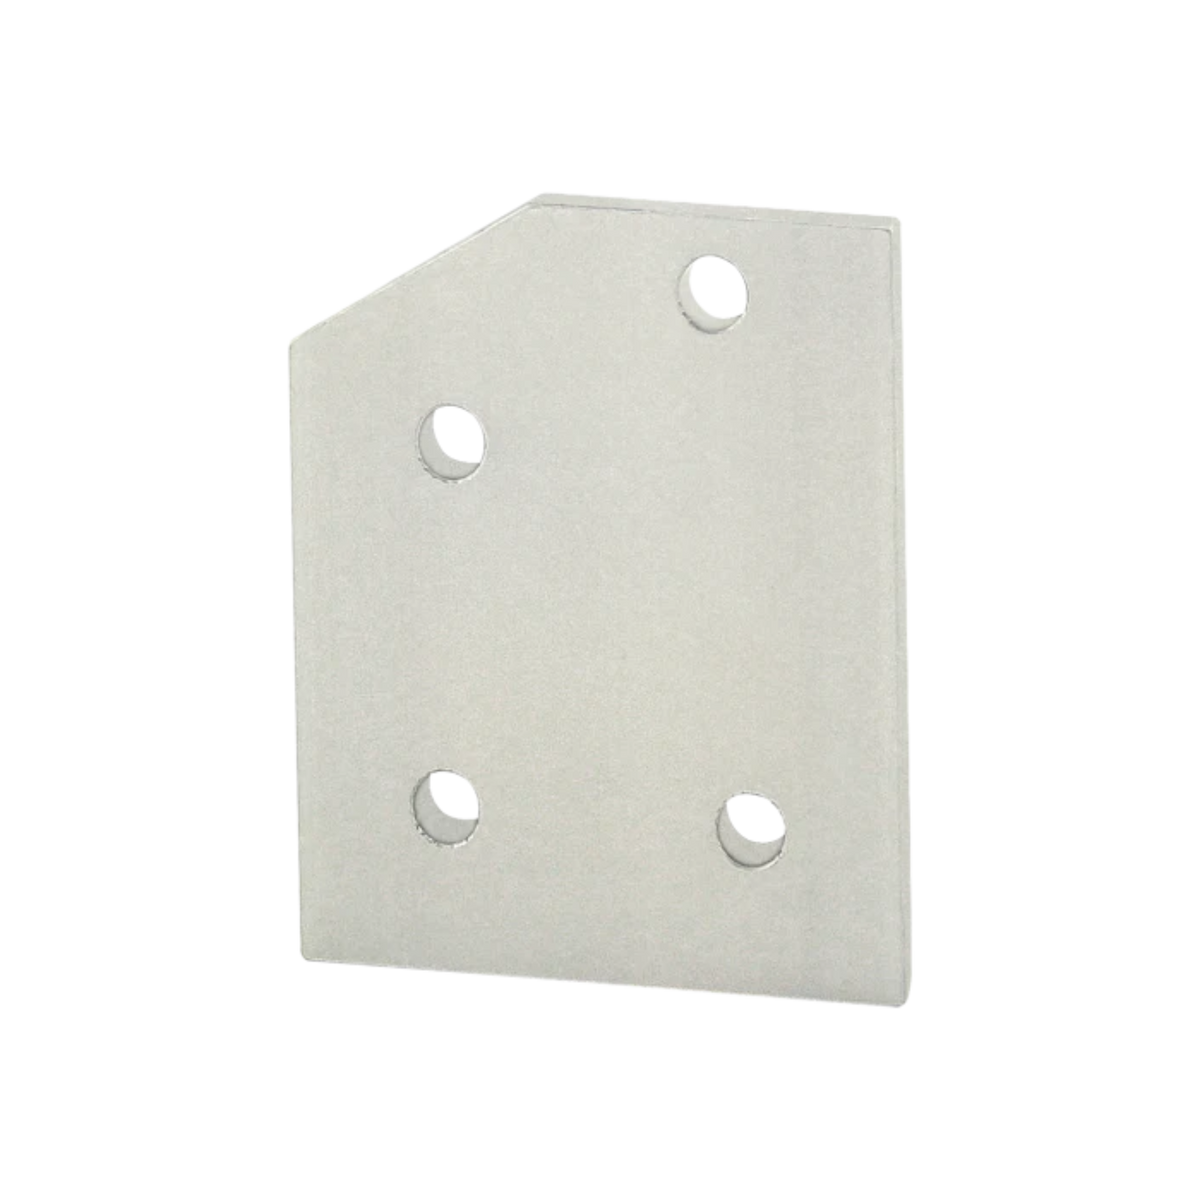 white, rectangular flat plate with an angled corner on the top left and four mounting holes